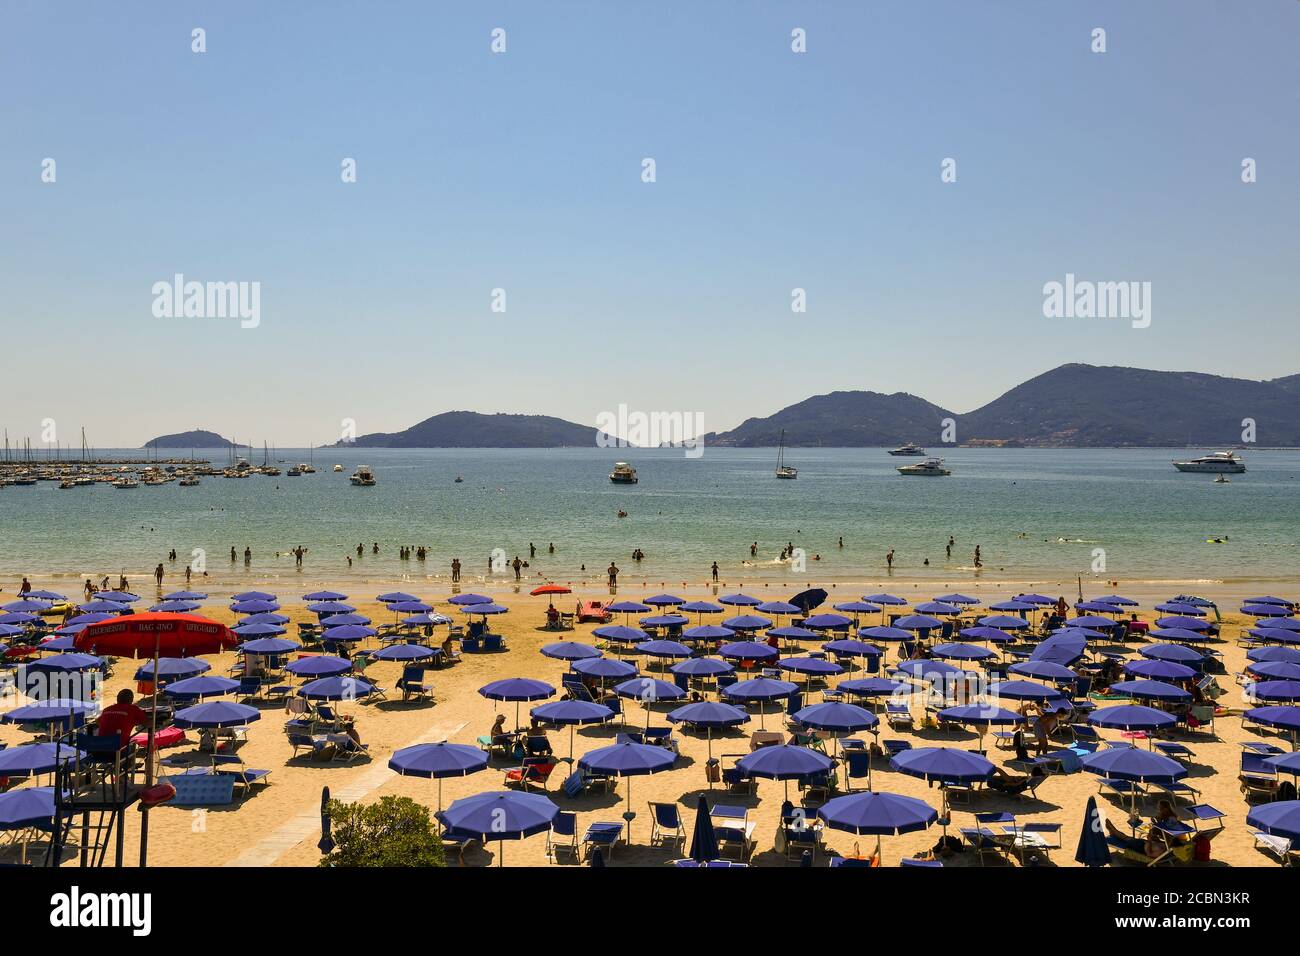 Scenic view of a sandy beach with rows of sun umbrellas, vacationers on the shore and the promontory of Porto Venere in summer, Lerici, Liguria, Italy Stock Photo